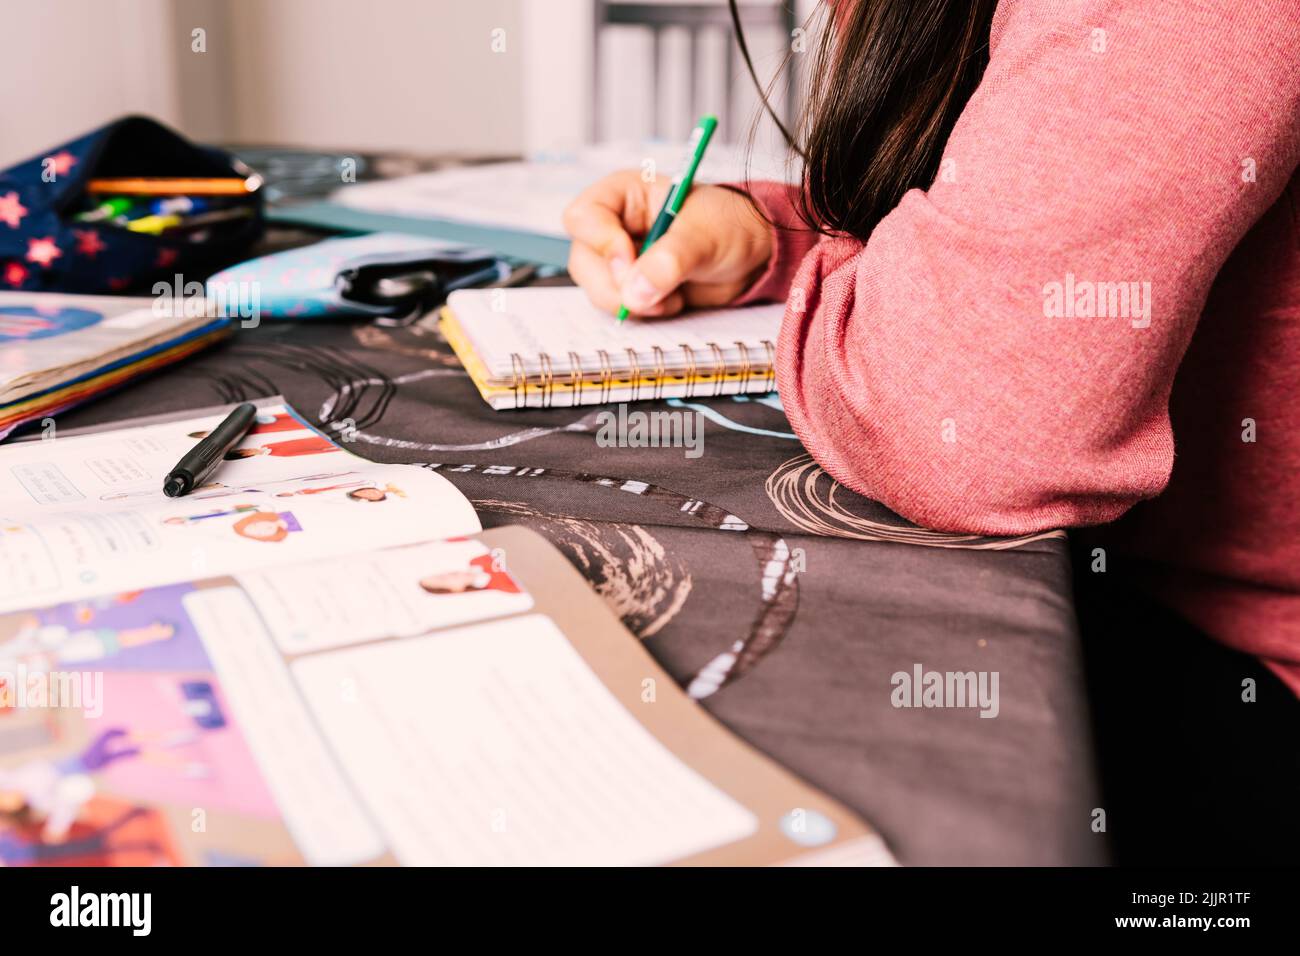 A young girl doing her homework on the table at home Stock Photo